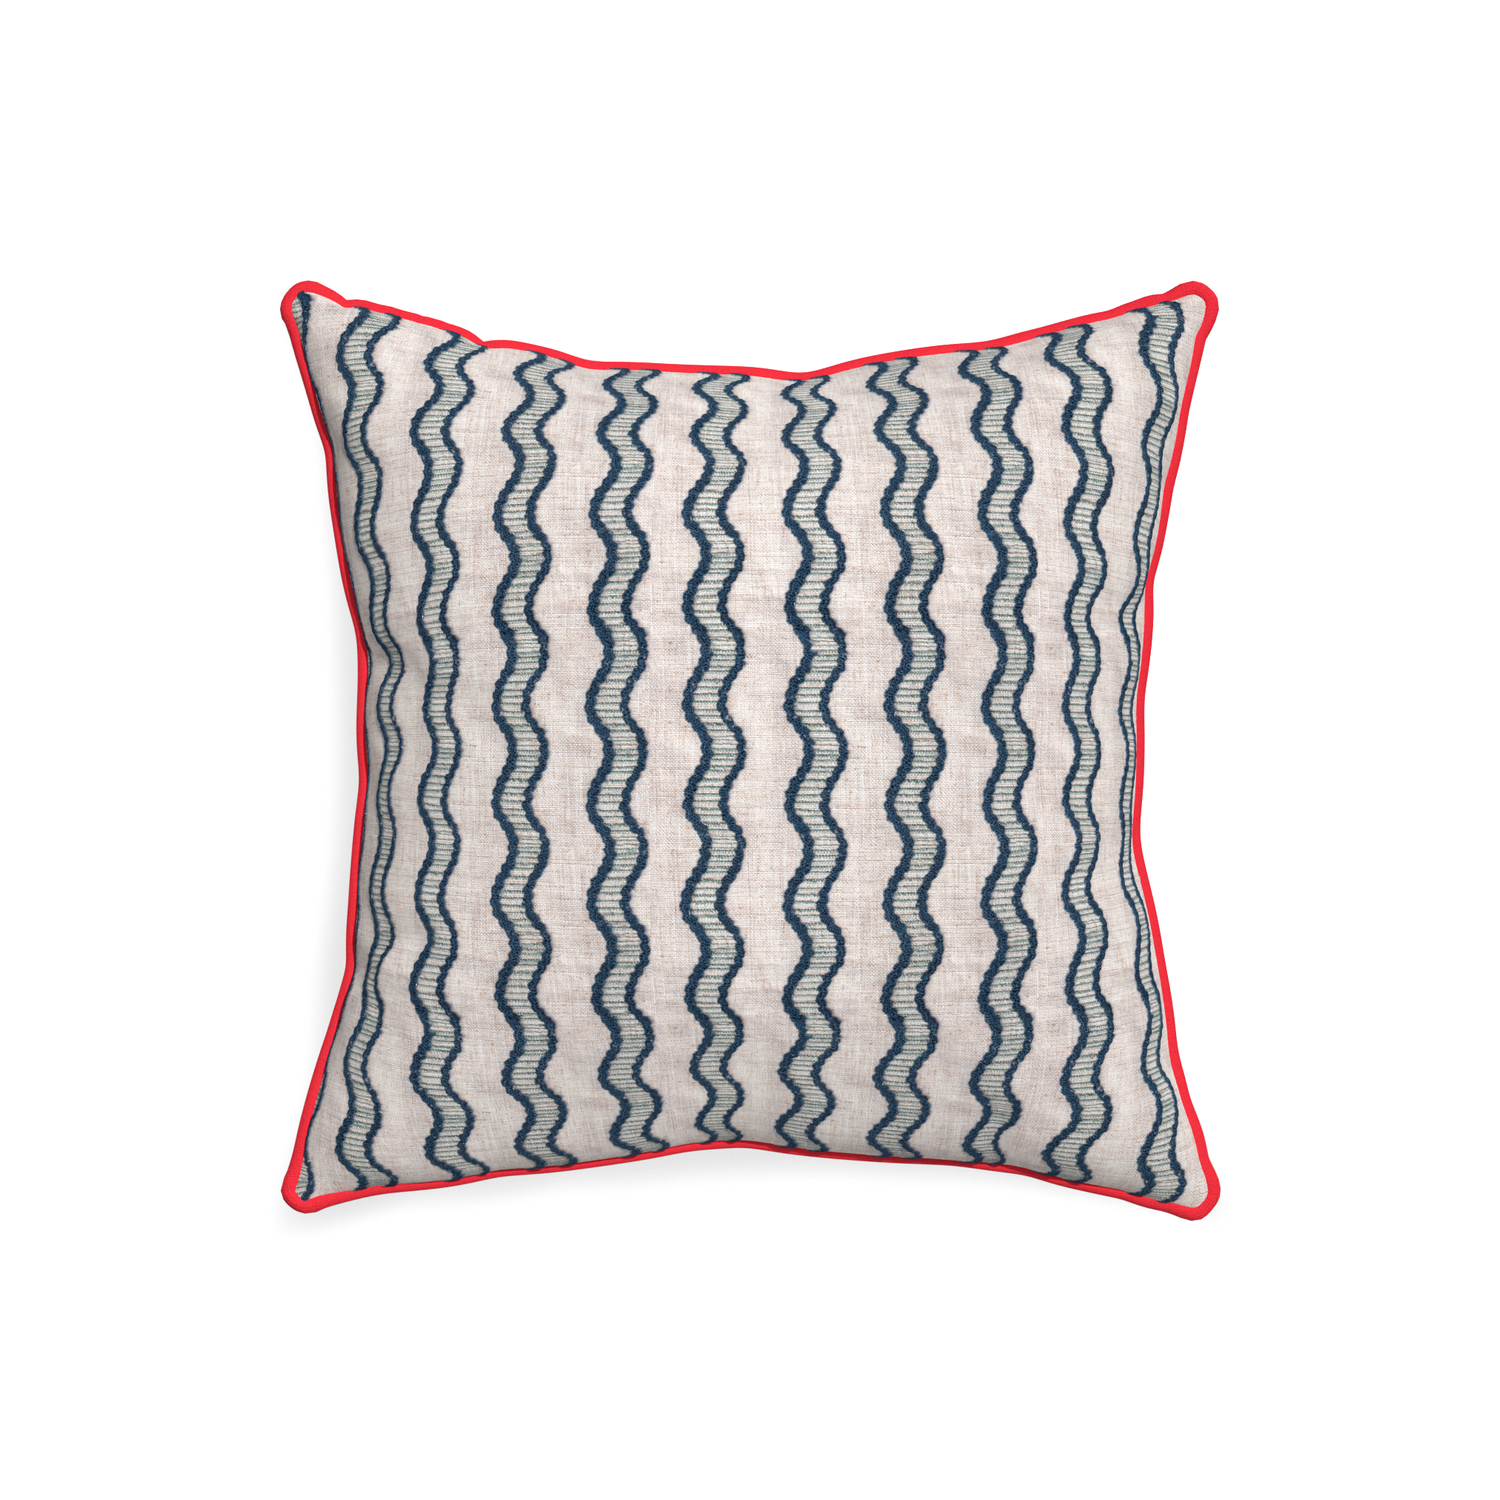 20-square beatrice custom embroidered wavepillow with cherry piping on white background